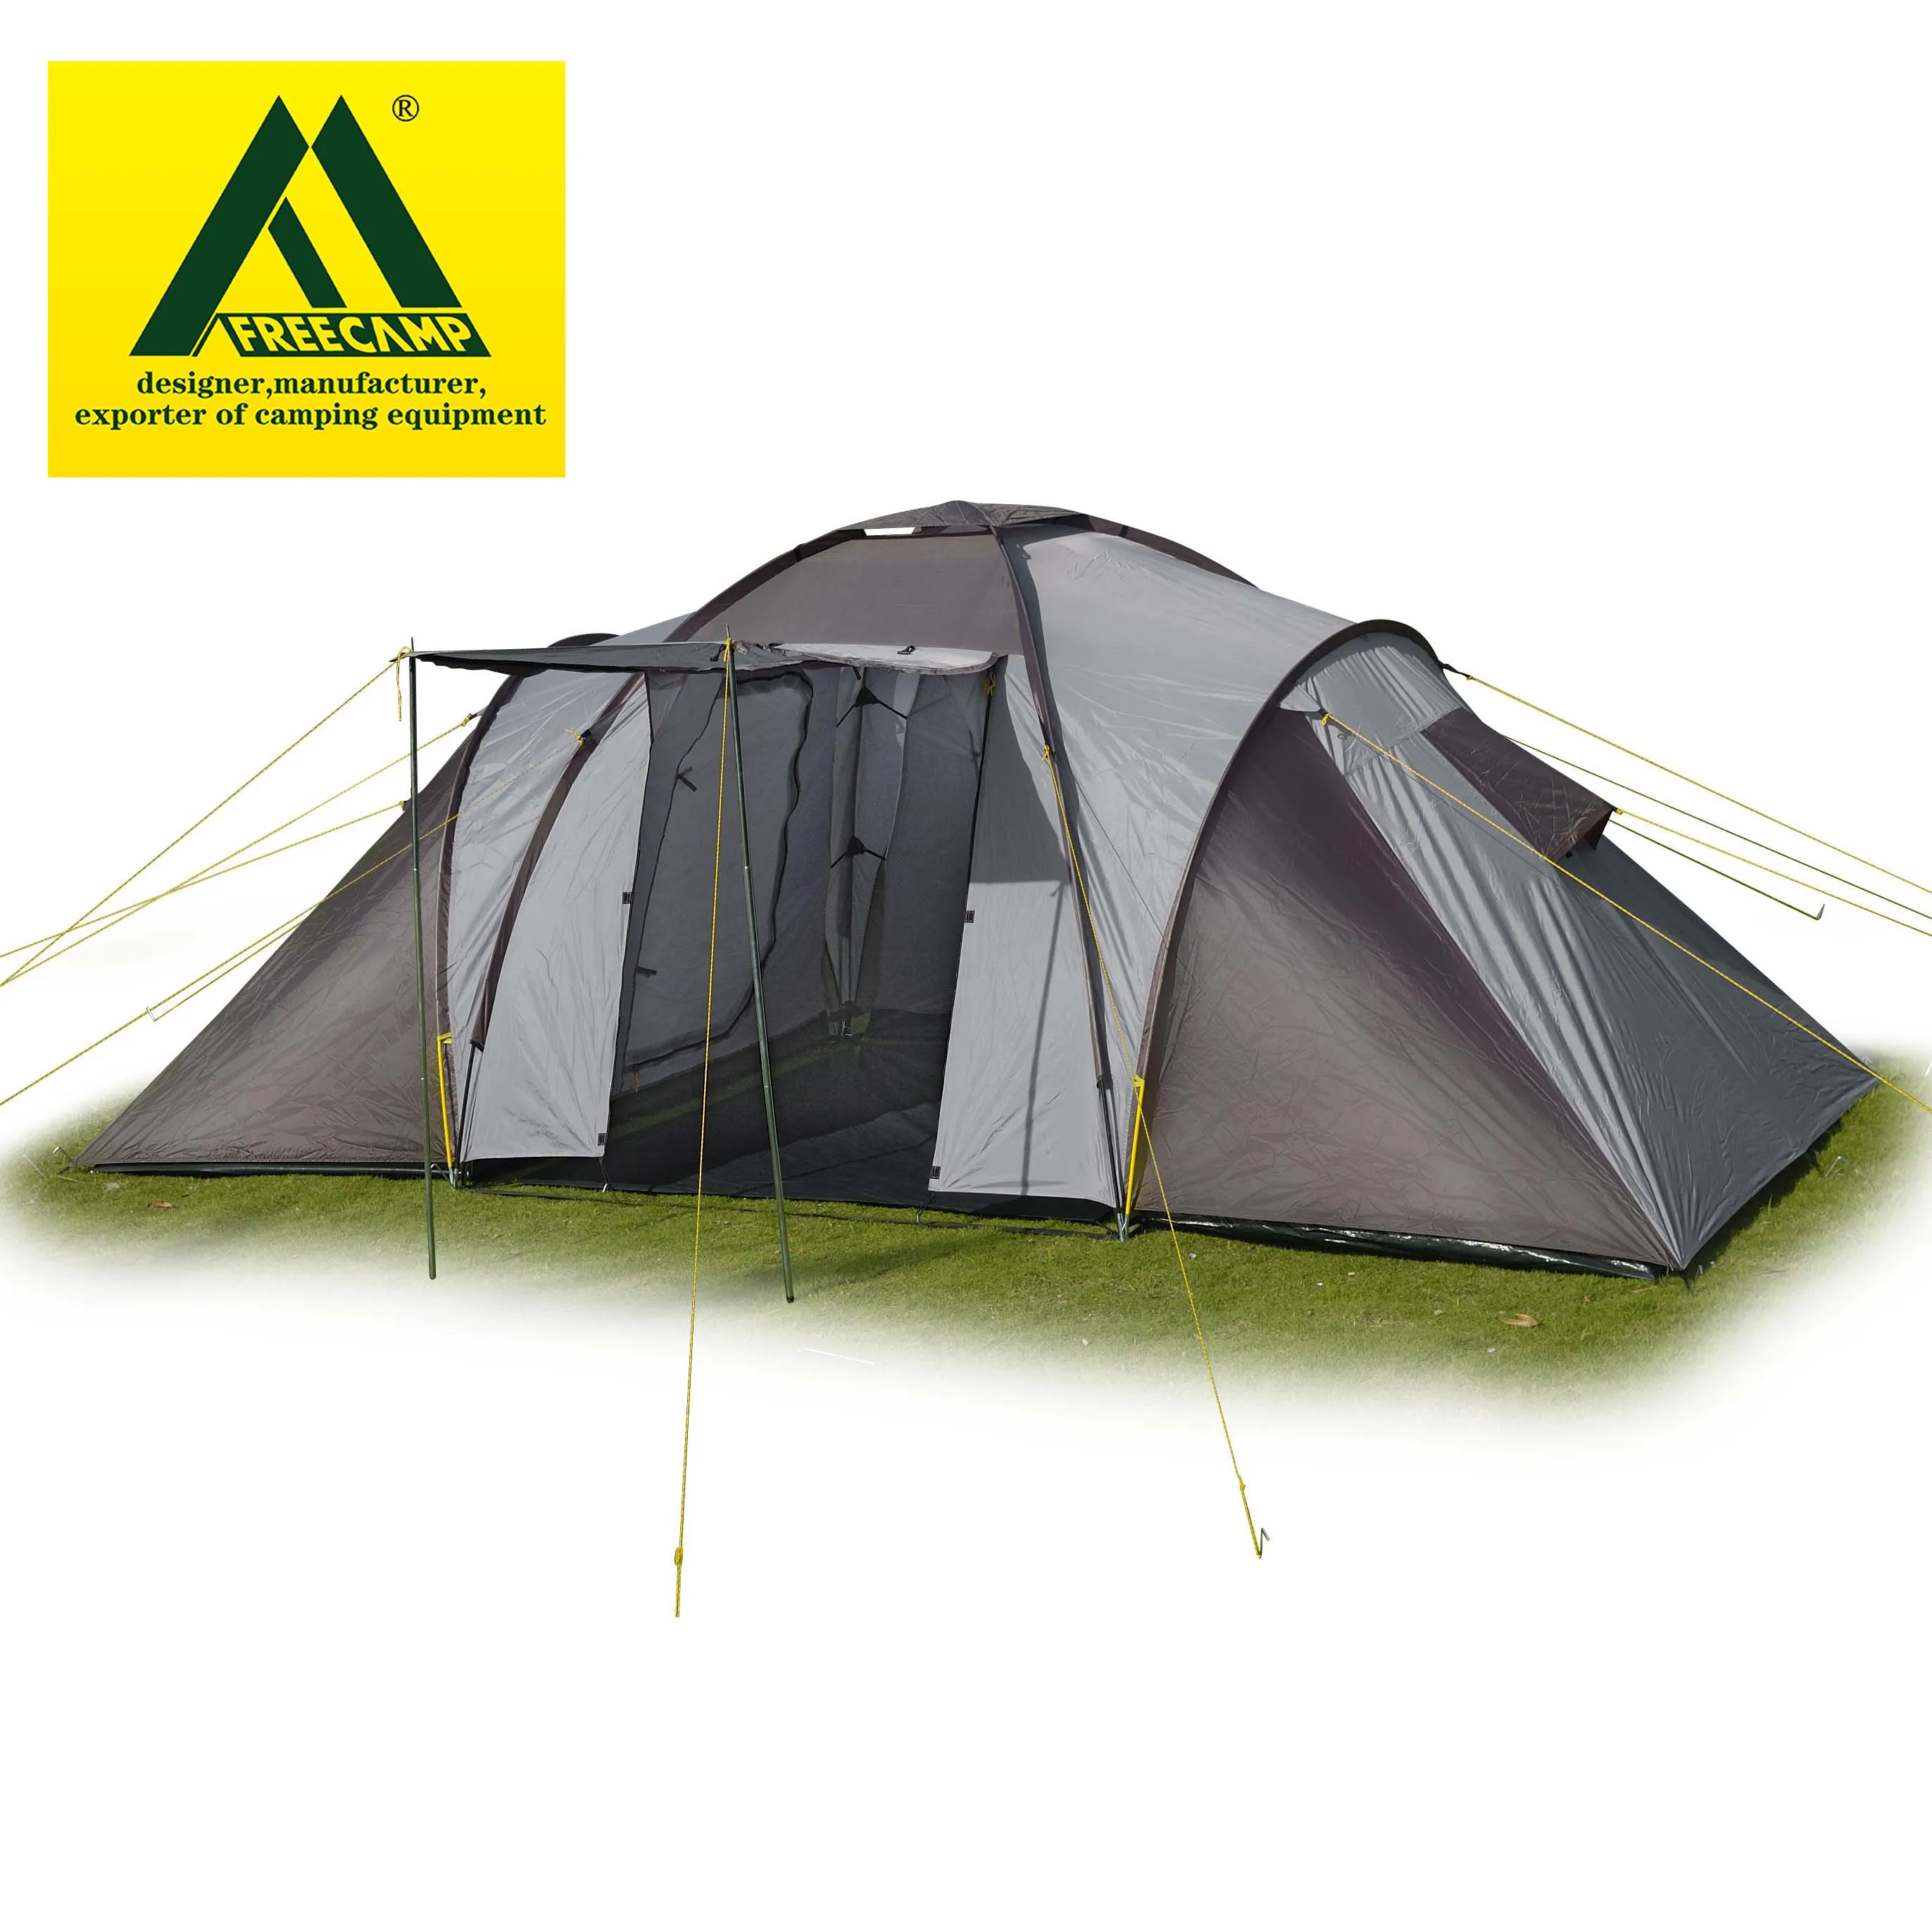 Outdoor Camping 6 Persons 3 Bedroom Big Family Size Tent Buy Family Camping Tents 6 Persons Big Camping Tent 3 Bedroom Family Camping Tent Product